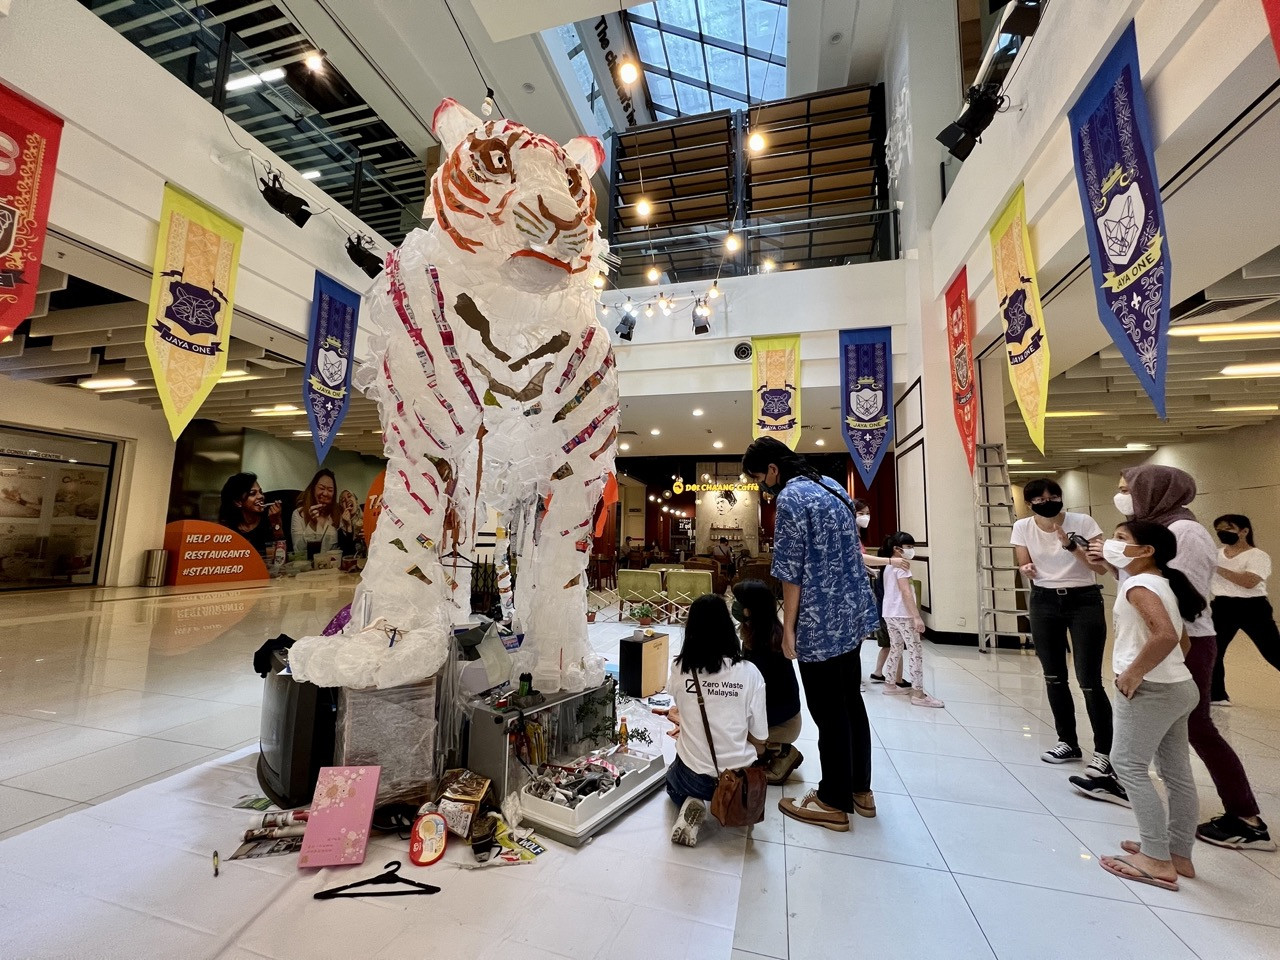 Visitors curious to see up-close and take photos with the Tiger sculpture can do so by visiting The School, Jaya One until May 5. – Amalina Kamal pic